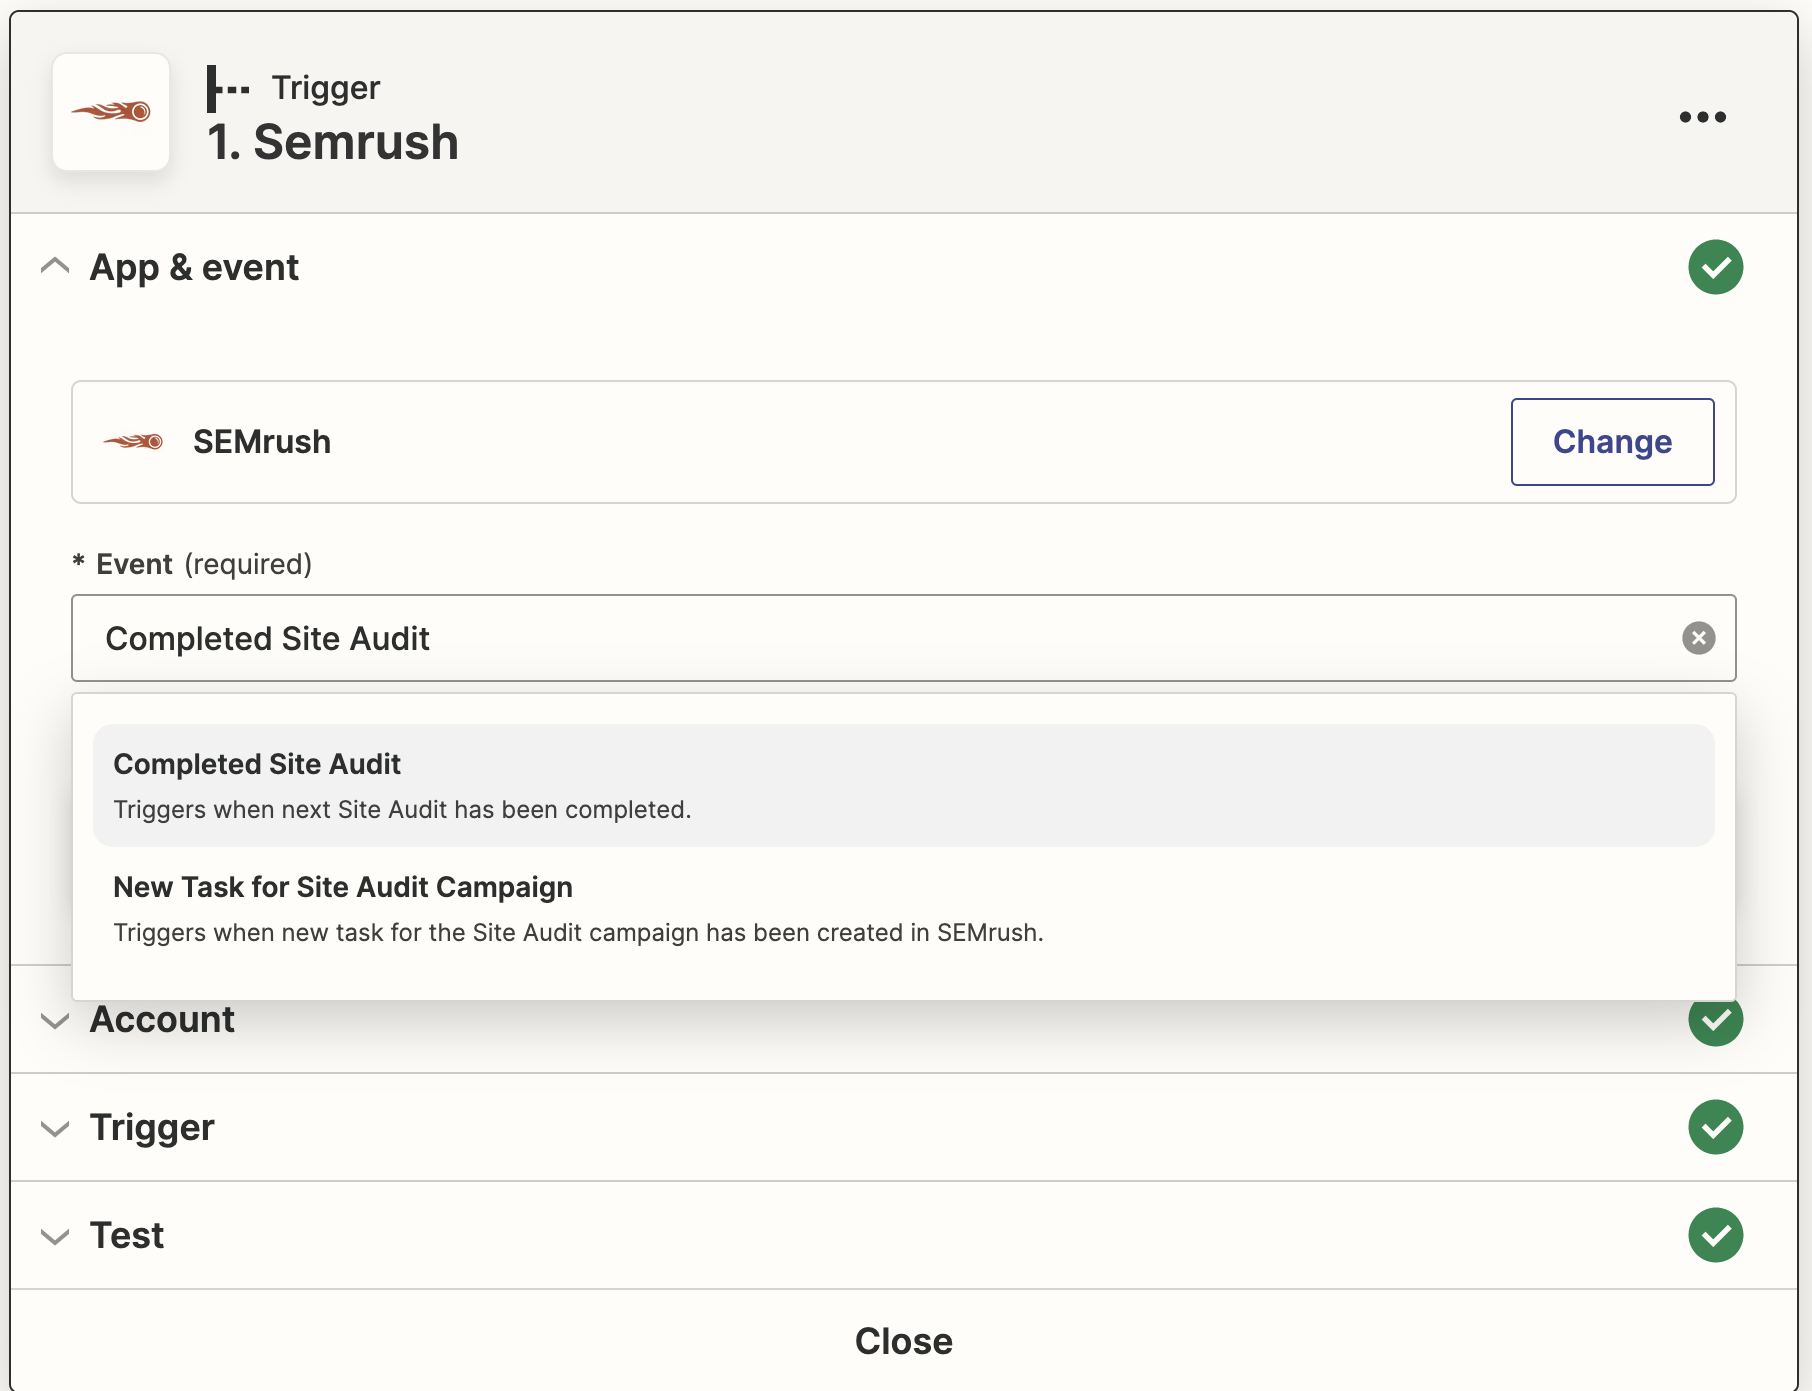 Screenshot from Zapier showing events 'Completed Site Audit' and 'New Task for Site Audit Campaign'.